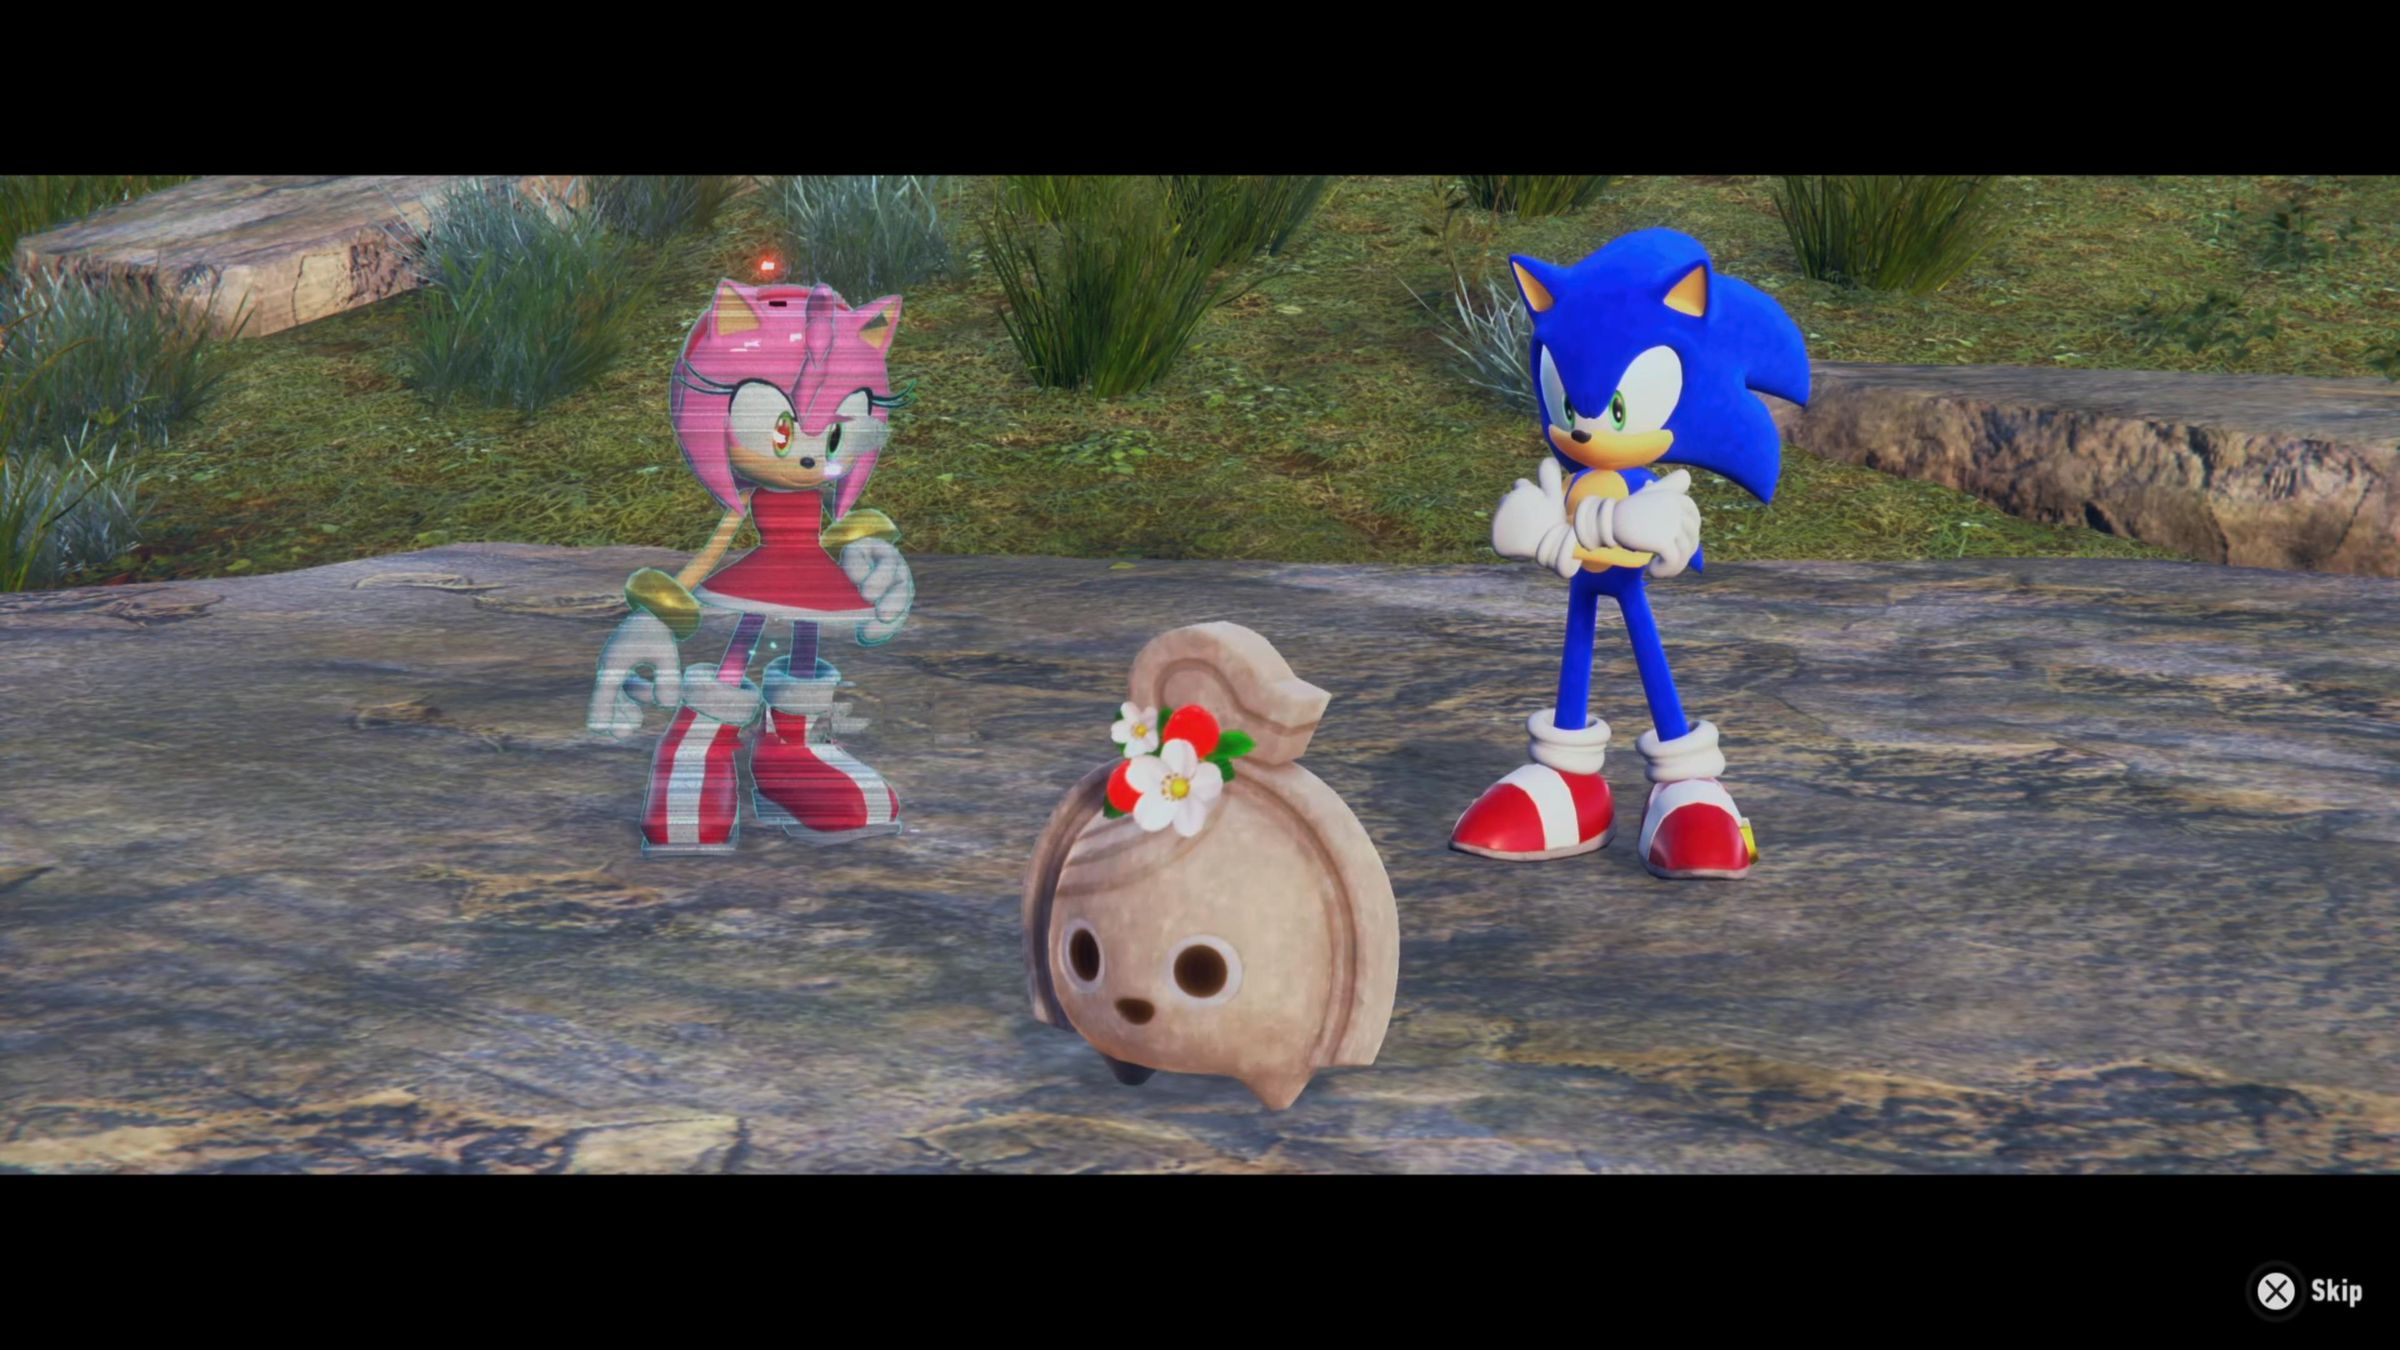 Screenshot from Sonic Frontiers featuring Amy a pink hedgehog, Sonic, a blue hedgehog, and a round stone automaton known as a Koco.